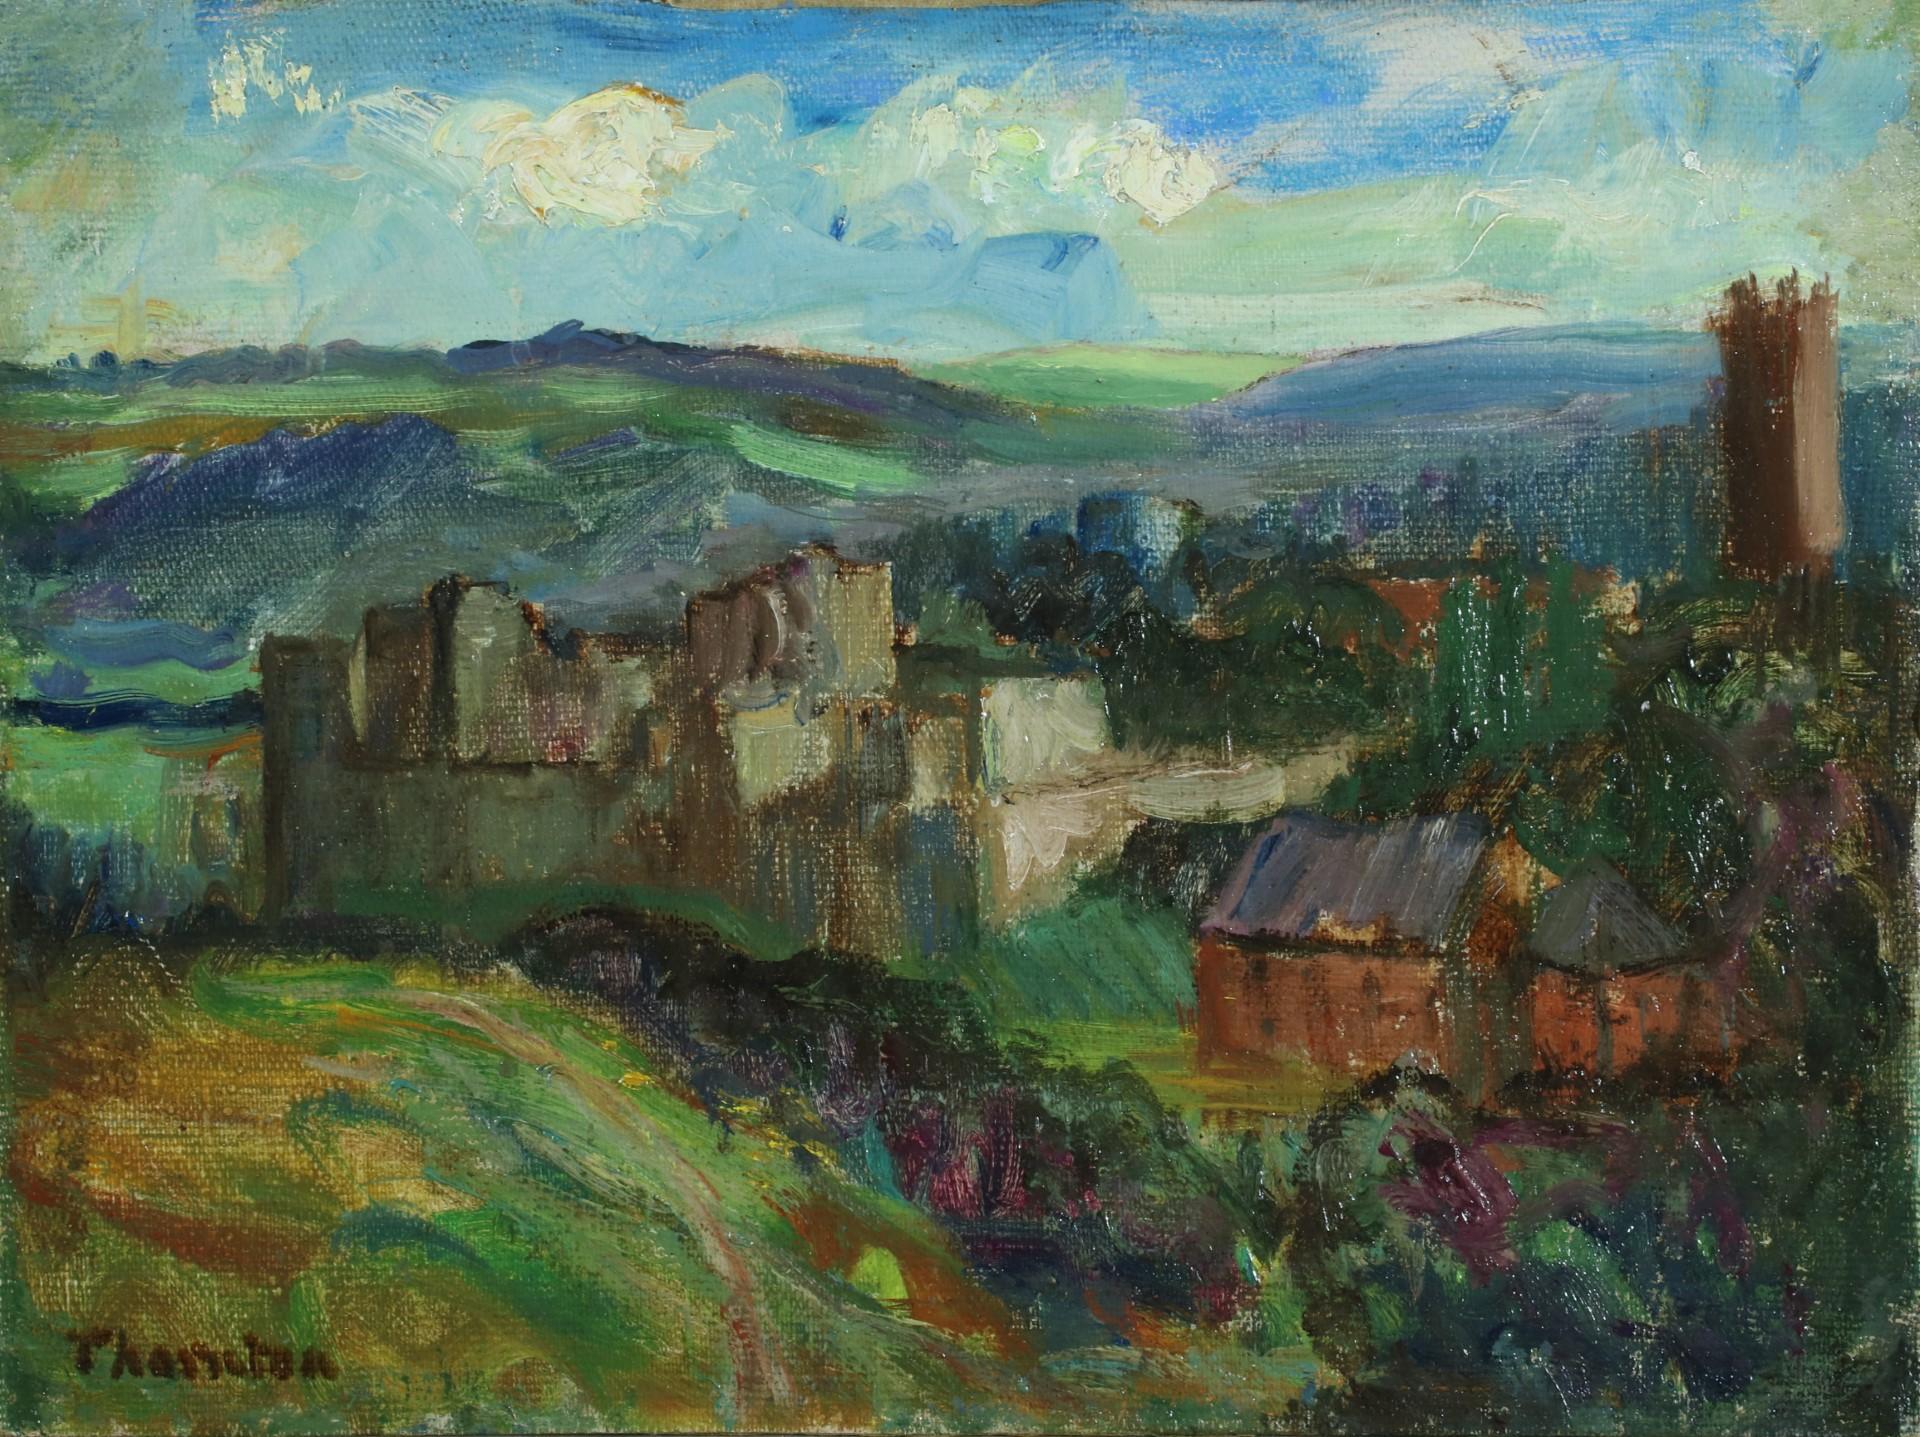 Ludlow Castle, Shropshire with Clee Hills beyond  - bright landscape in Oils